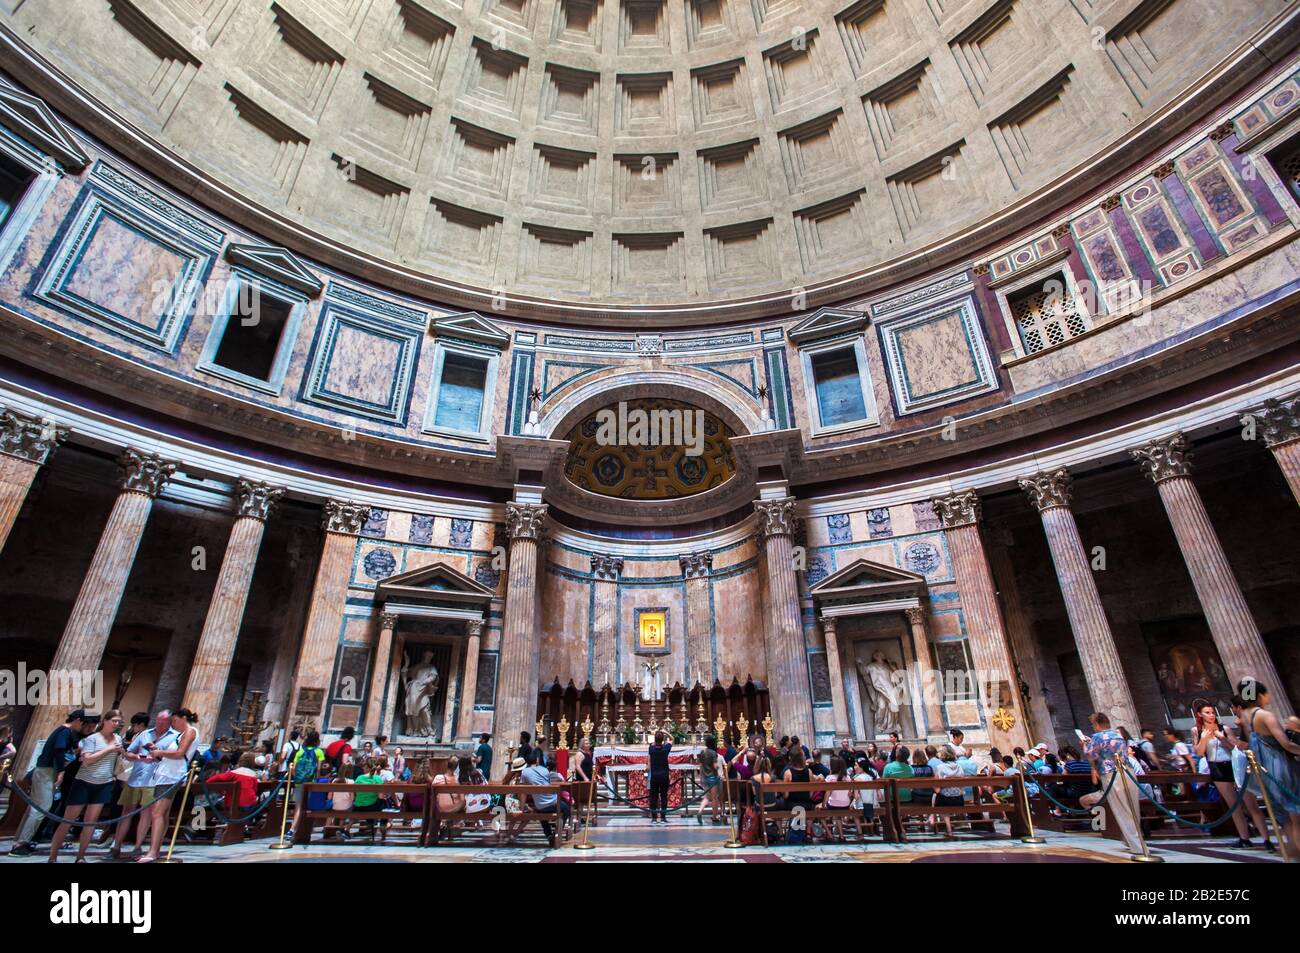 Tourists admire the altar and famous domed ceiling inside the Pantheon building in Rome Stock Photo